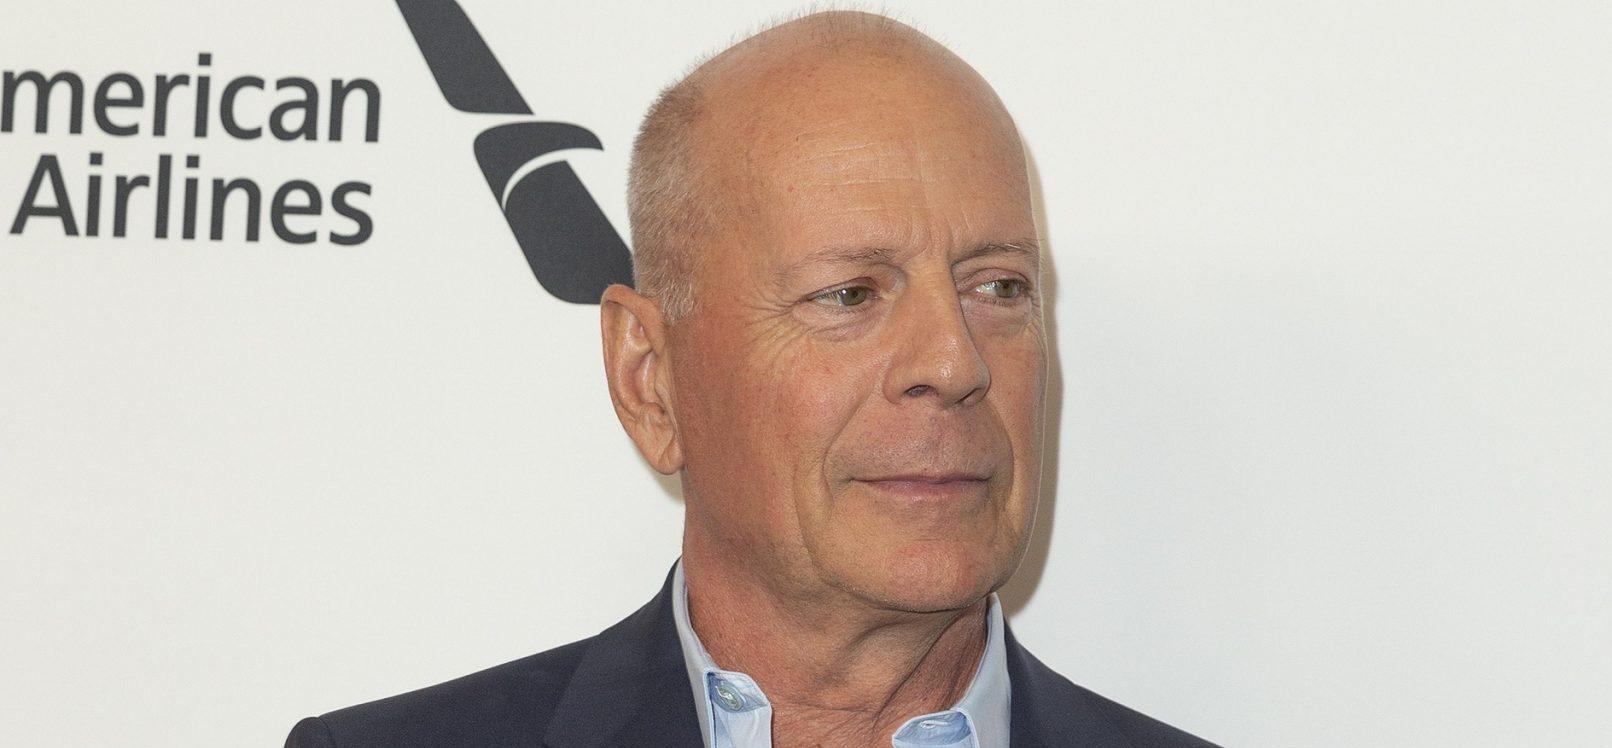 Bruce Willis Loses Razzie Award After Aphasia Diagnosis Announcement